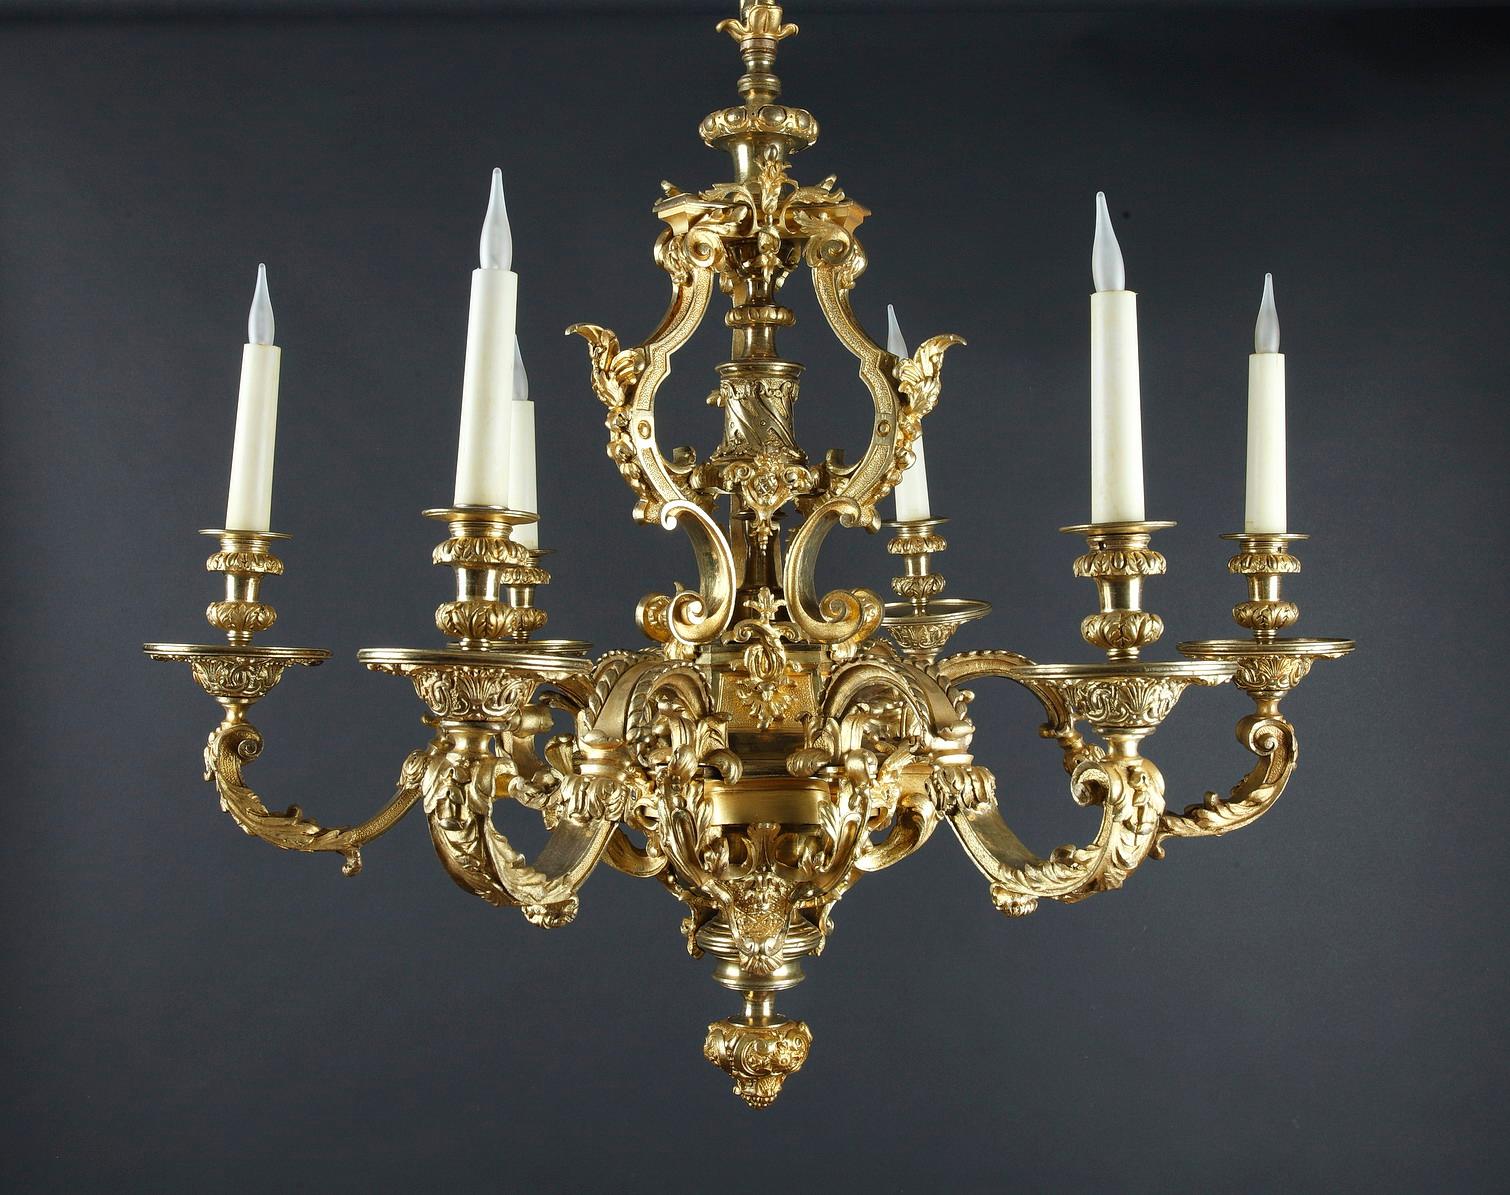 Rare chiseled and gilded bronze chandelier with six square section light-arms adorned with acanthus leaves et ending with delicately crafted binet and bobeches. The central baluster-shaped barrel richly decorated with foliage is framed by three